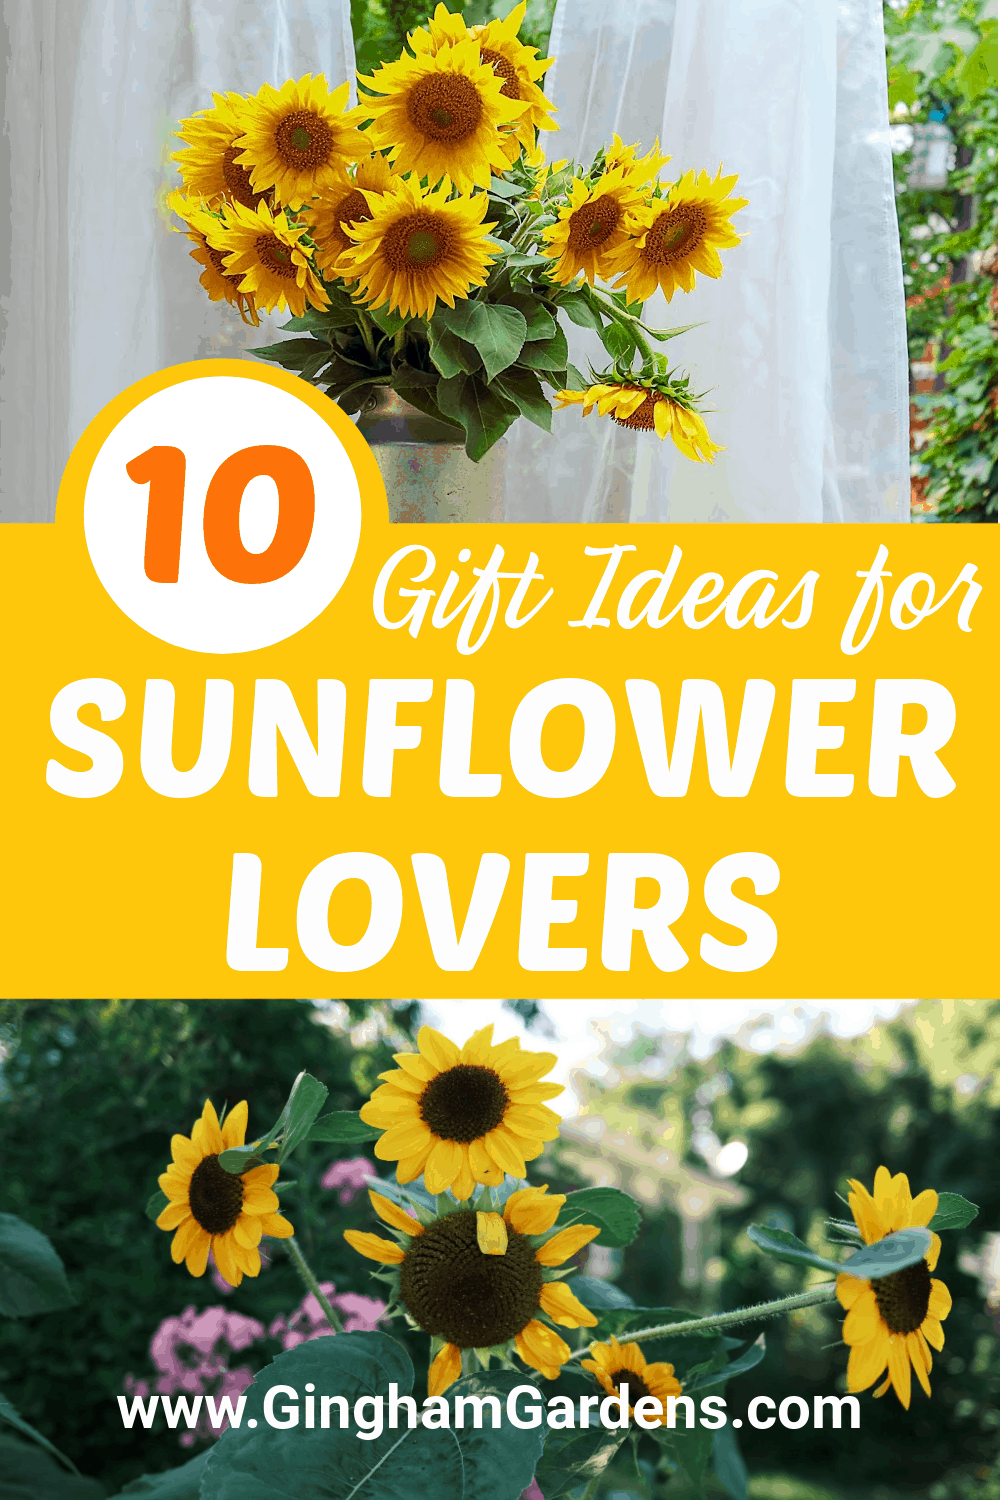 Images of Sunflowers with Text Overlay- 10 Gift Ideas for Sunflower Lovers